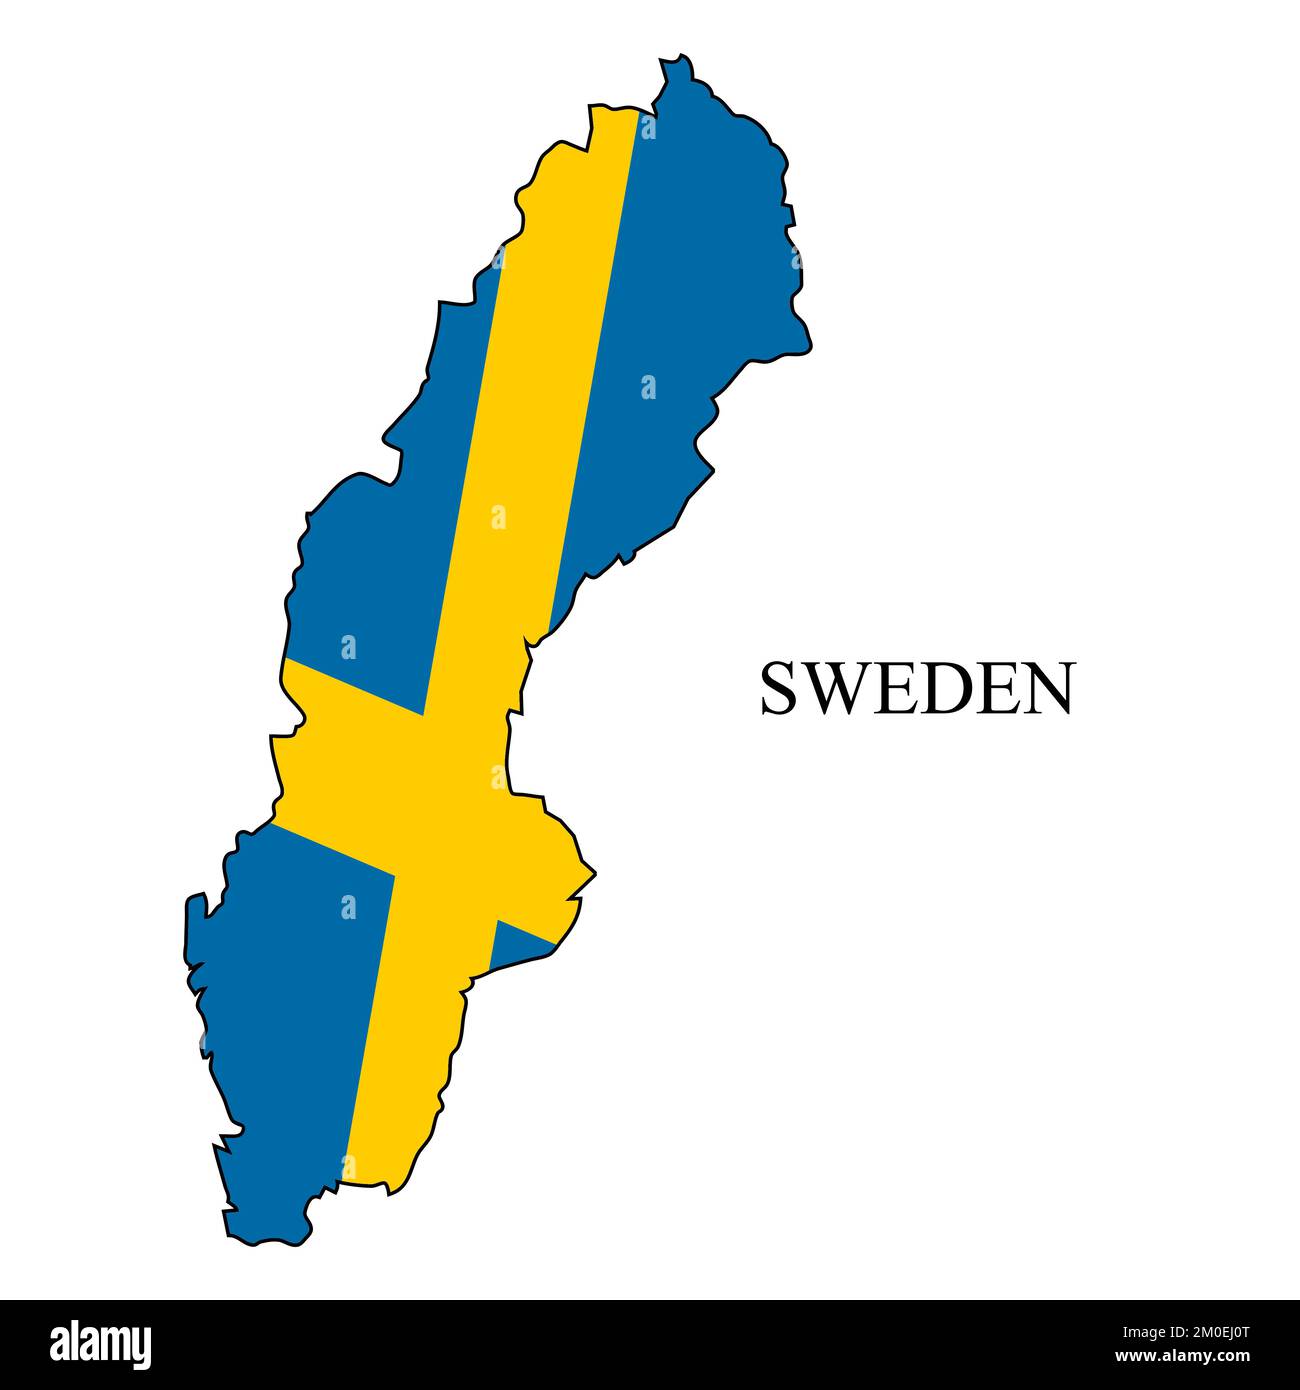 Sweden map vector illustration. Global economy. Famous country. Northern Europe. Europe. Scandinavian region. Stock Vector